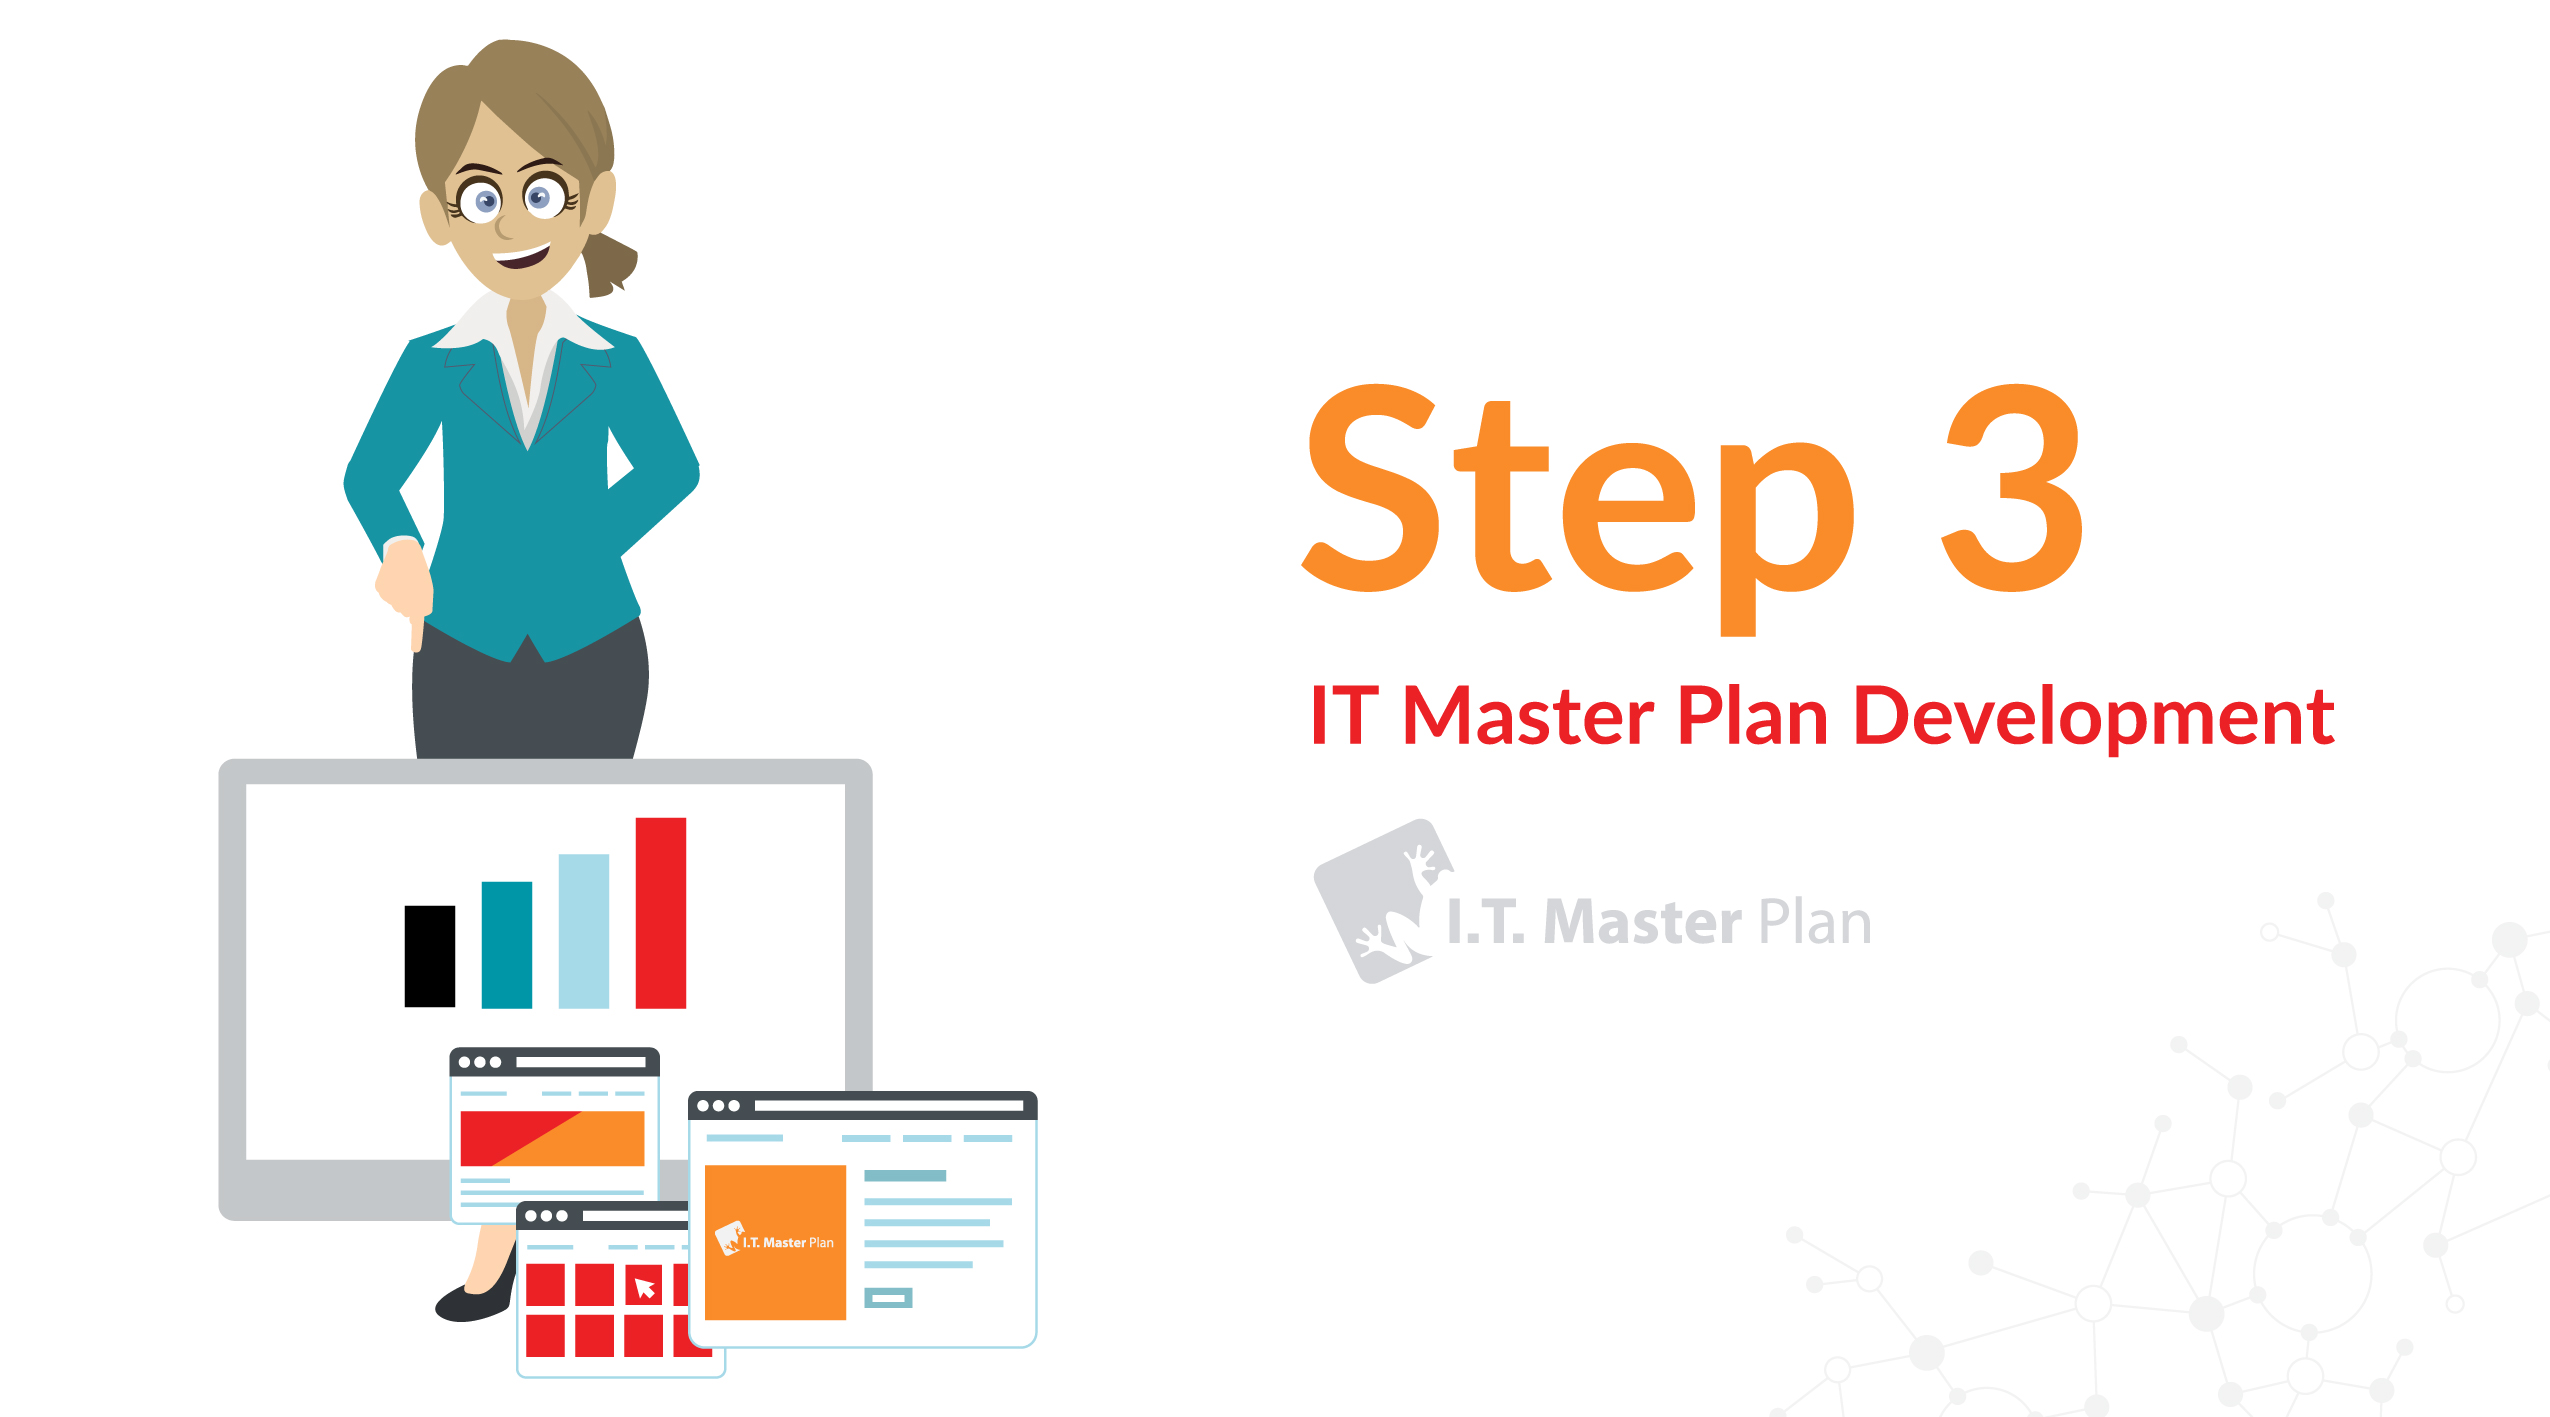 Cyber Security and IT Master Plan Development